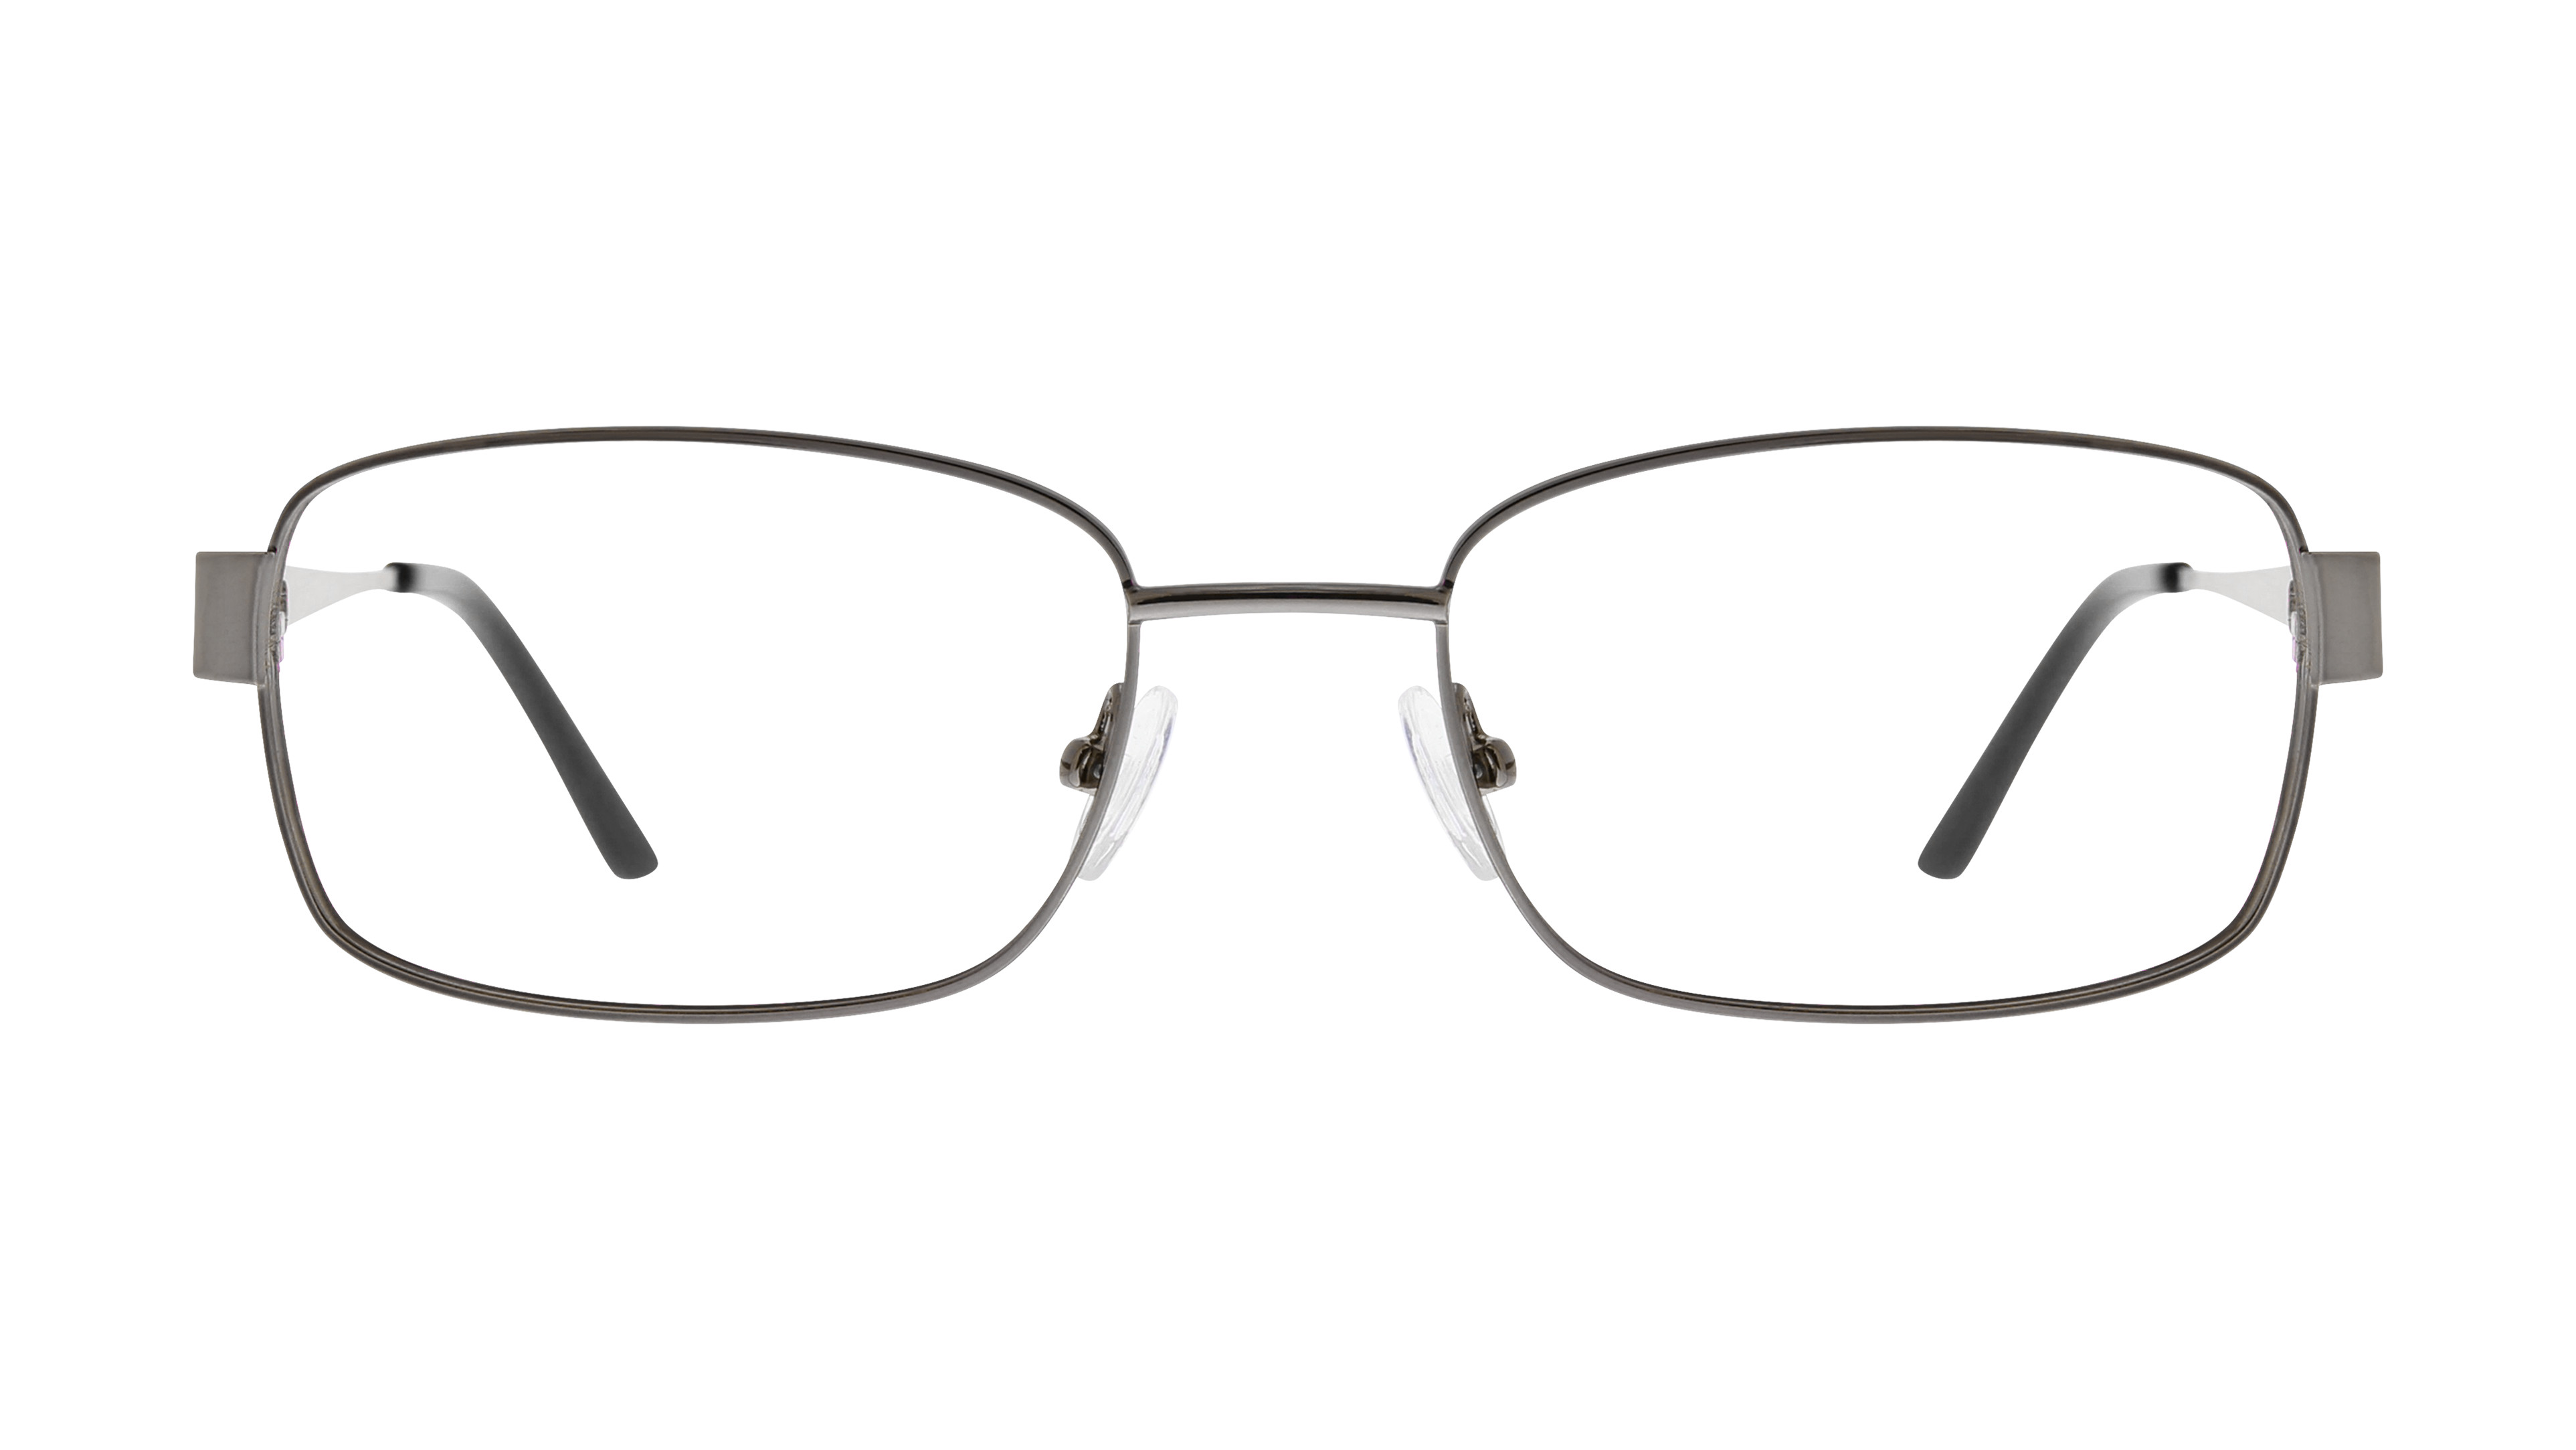 [products.image.front] Seen SNDF02 GG Brille